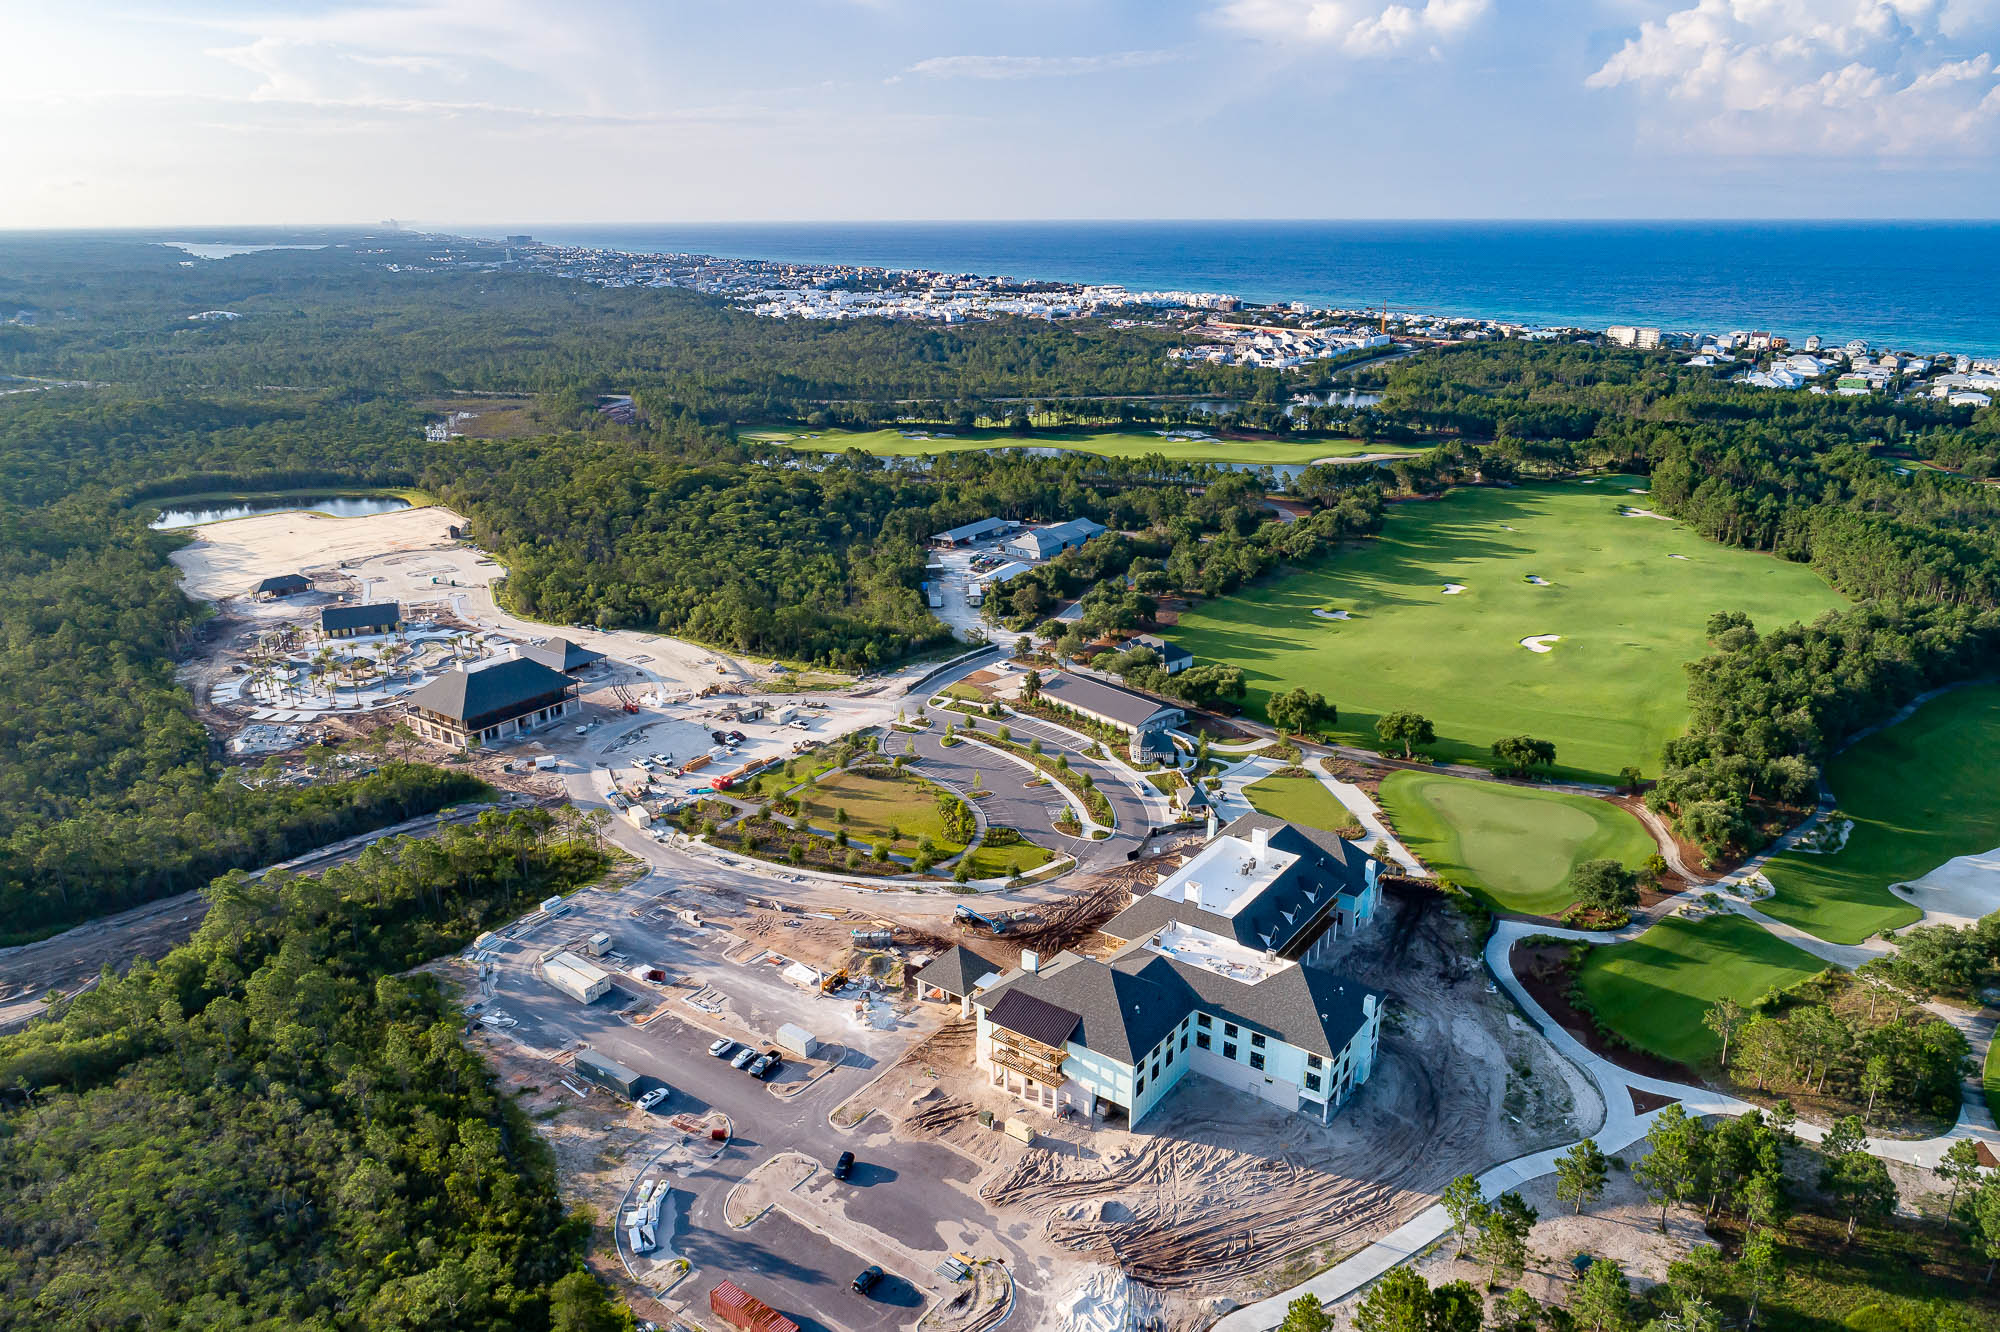 An aerial photo of the new Camp Creek Inn and new Camp Creek amenities construction progress, next to the bright green fairways of Camp Creek Golf Course, and its proximity to the Gulf of Mexico in the background